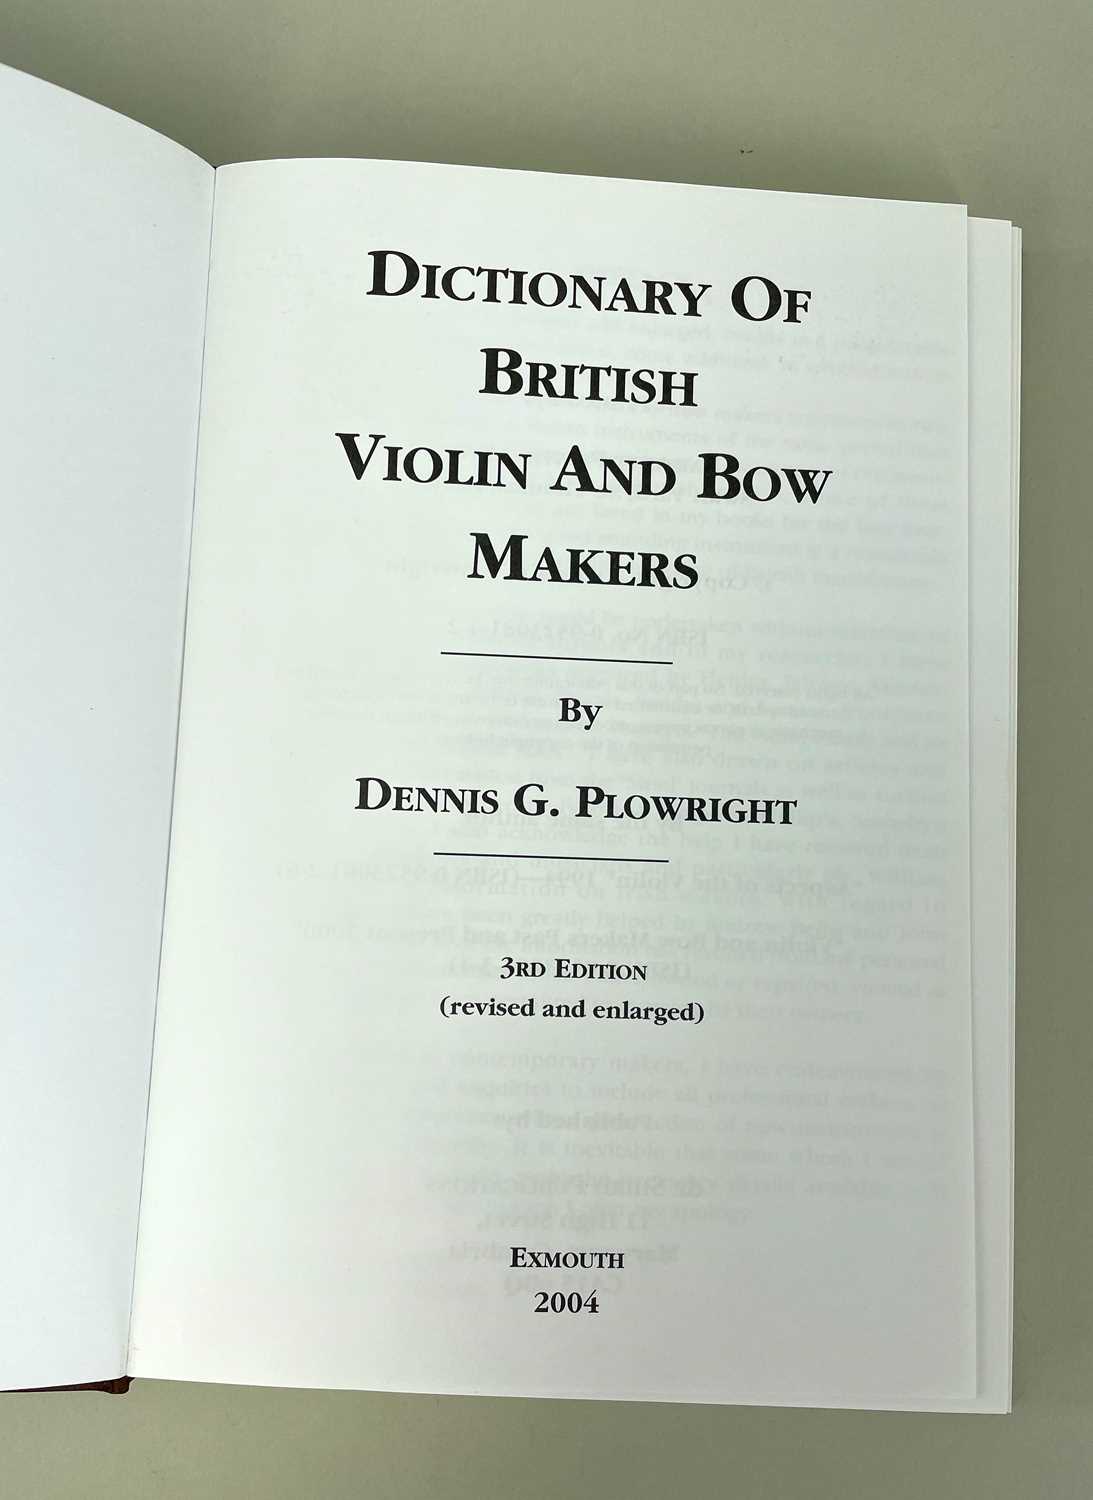 PLOWRIGHT (DENNIS G.) Dictionary of British Violin and Bow Makers, 3rd edition, 2004. - Image 2 of 2